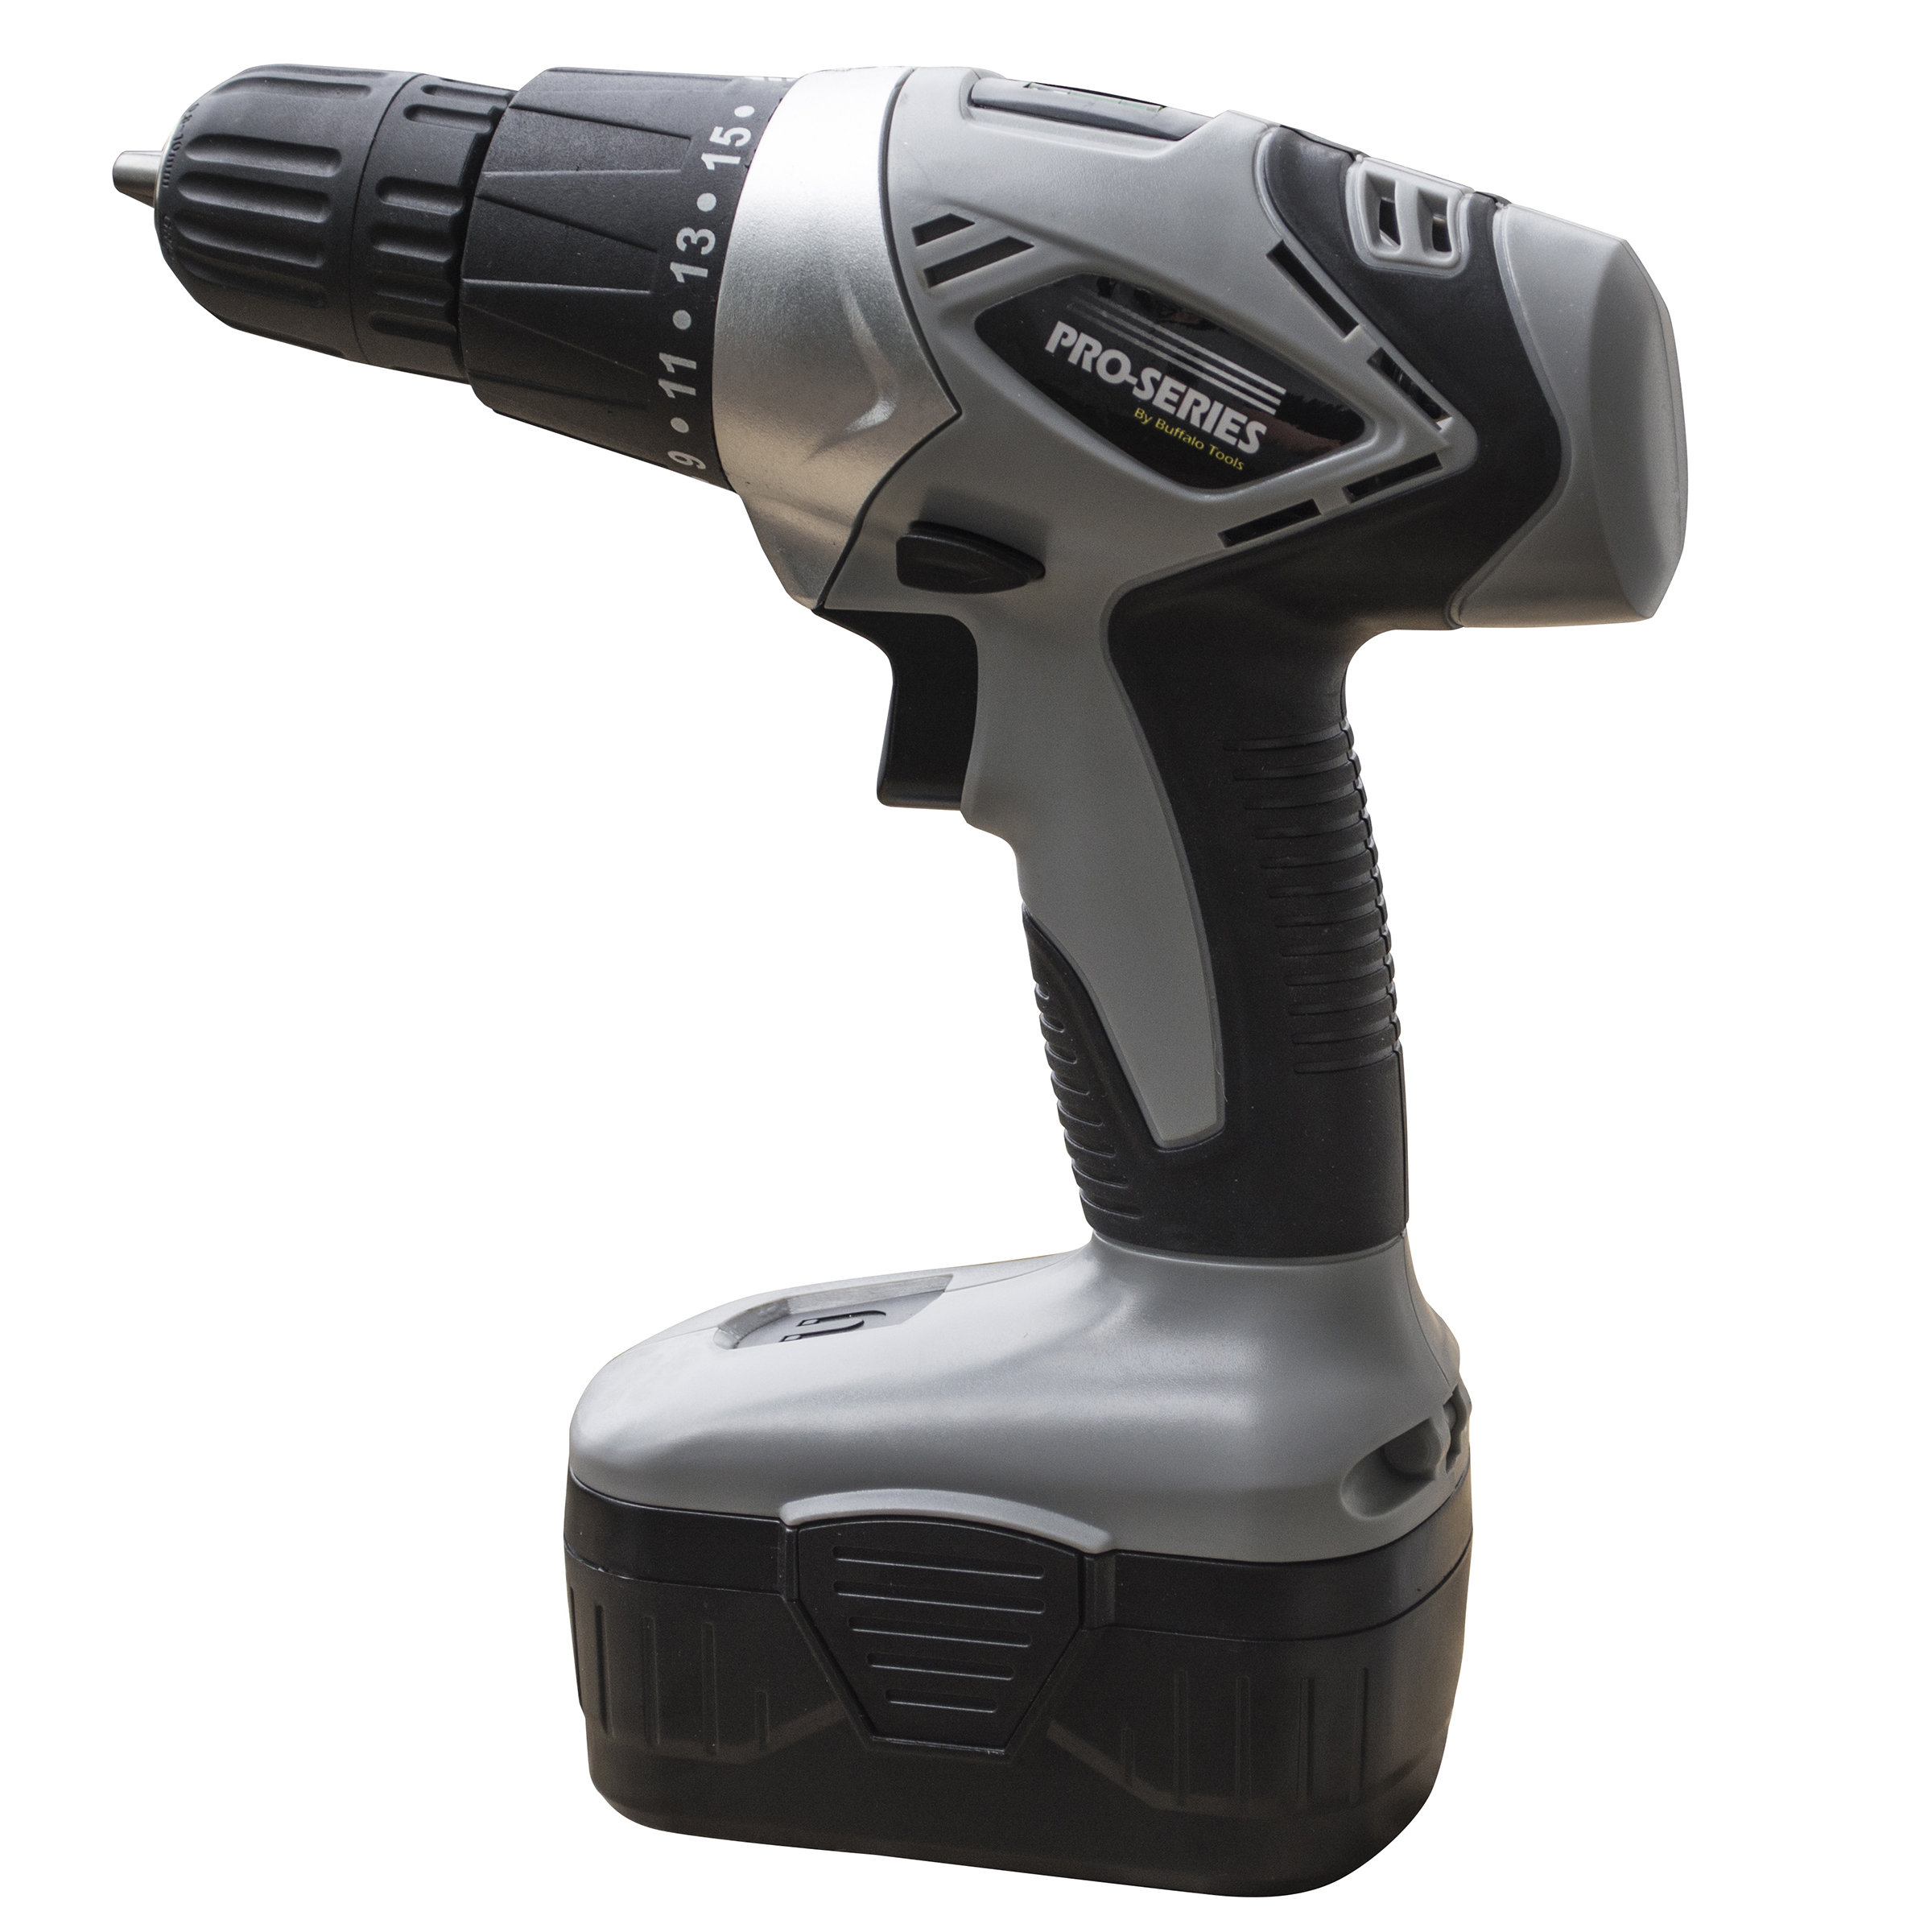 Pro Series Ps07215 18v Cordless Drill With Light And Level